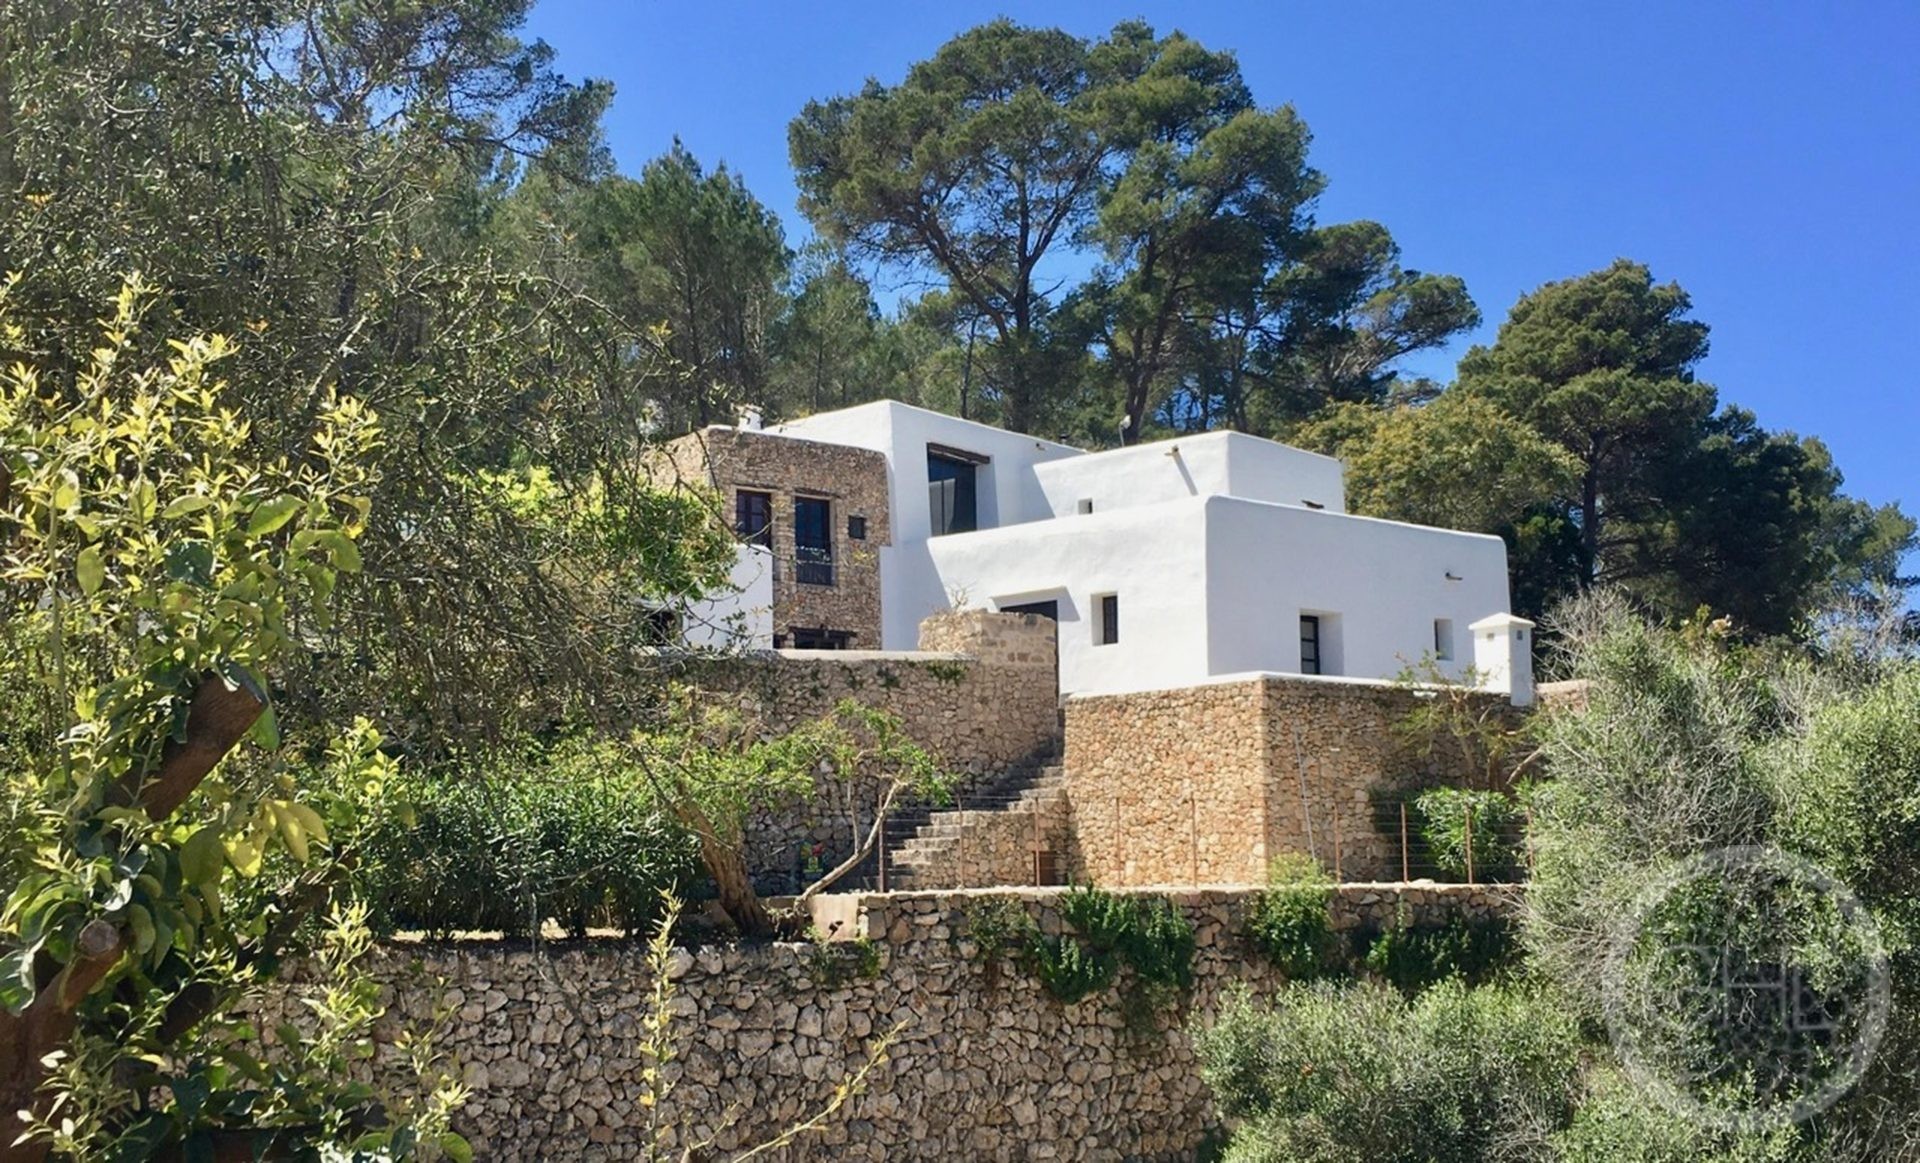 Ghl Ibiza Property 2281 1 Higher Res